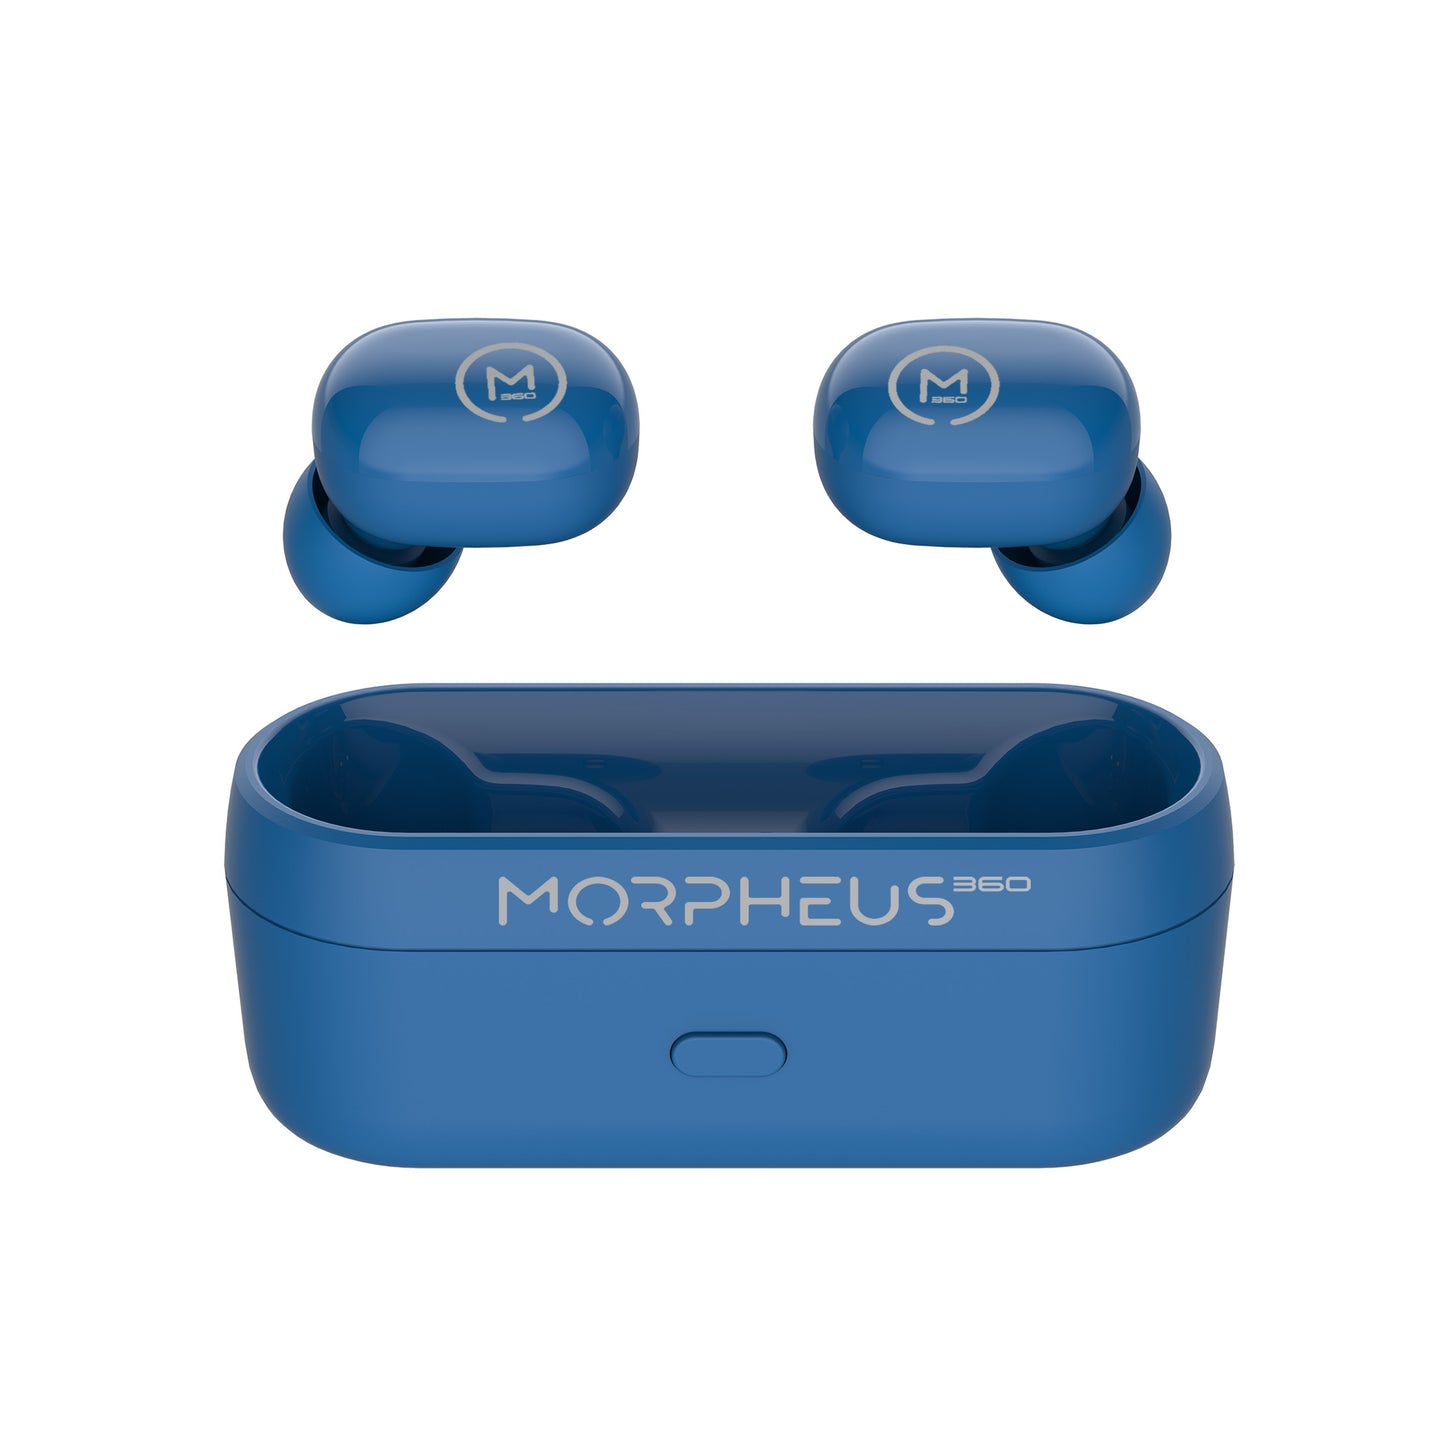 Photo of Morpheus 360 Spire True Wireless Earbuds Blue left and right button earbuds with charging case.